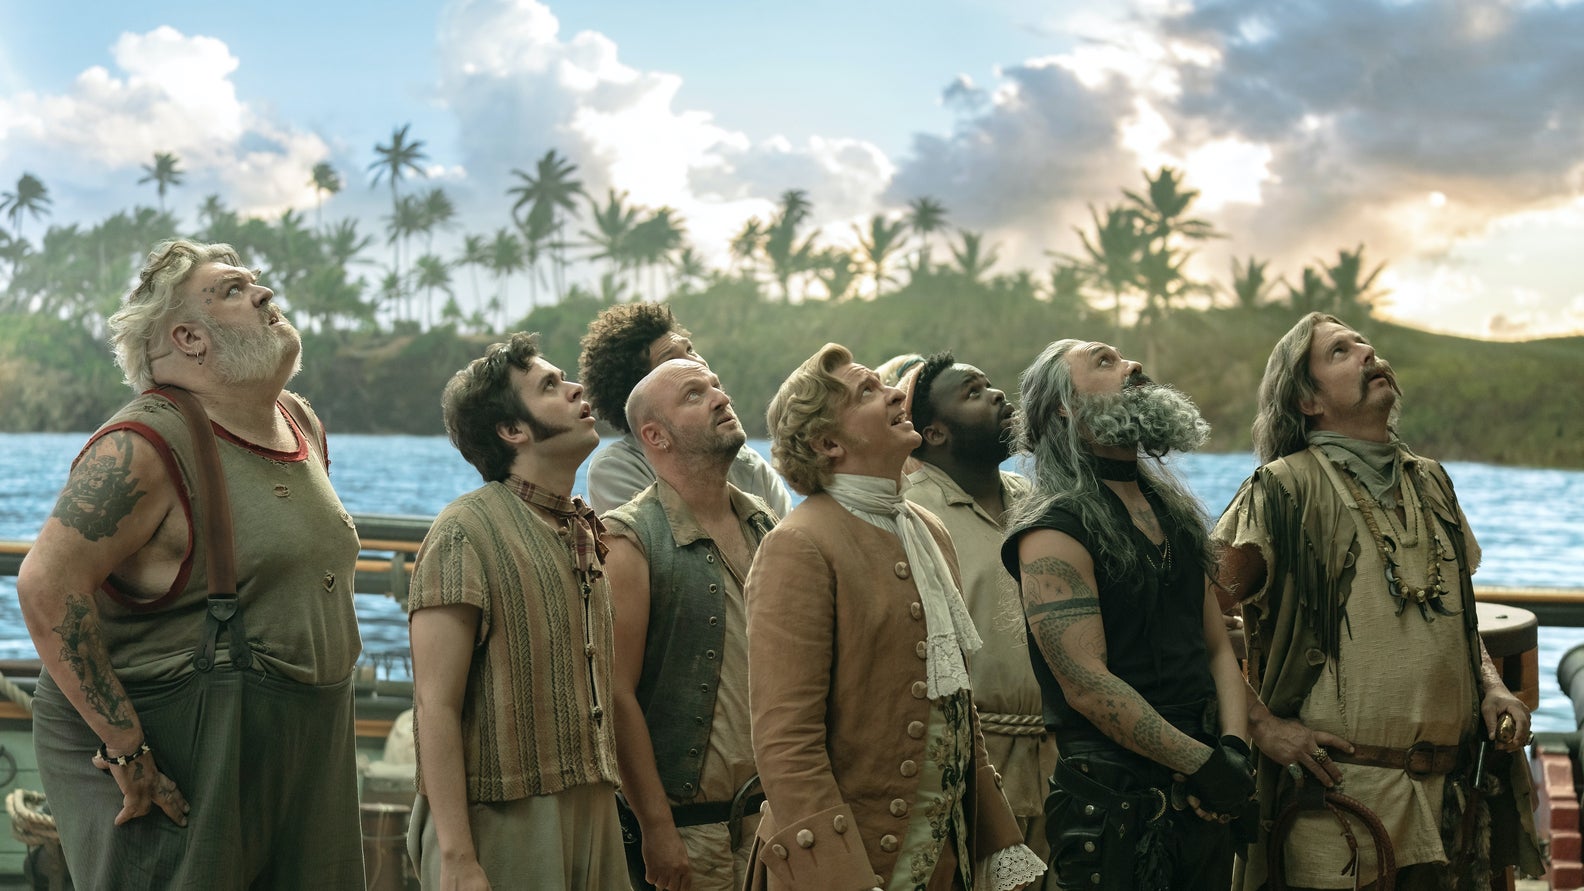 Photograph of a group of pirates on a ship with the sea behind them, looking up at the sky